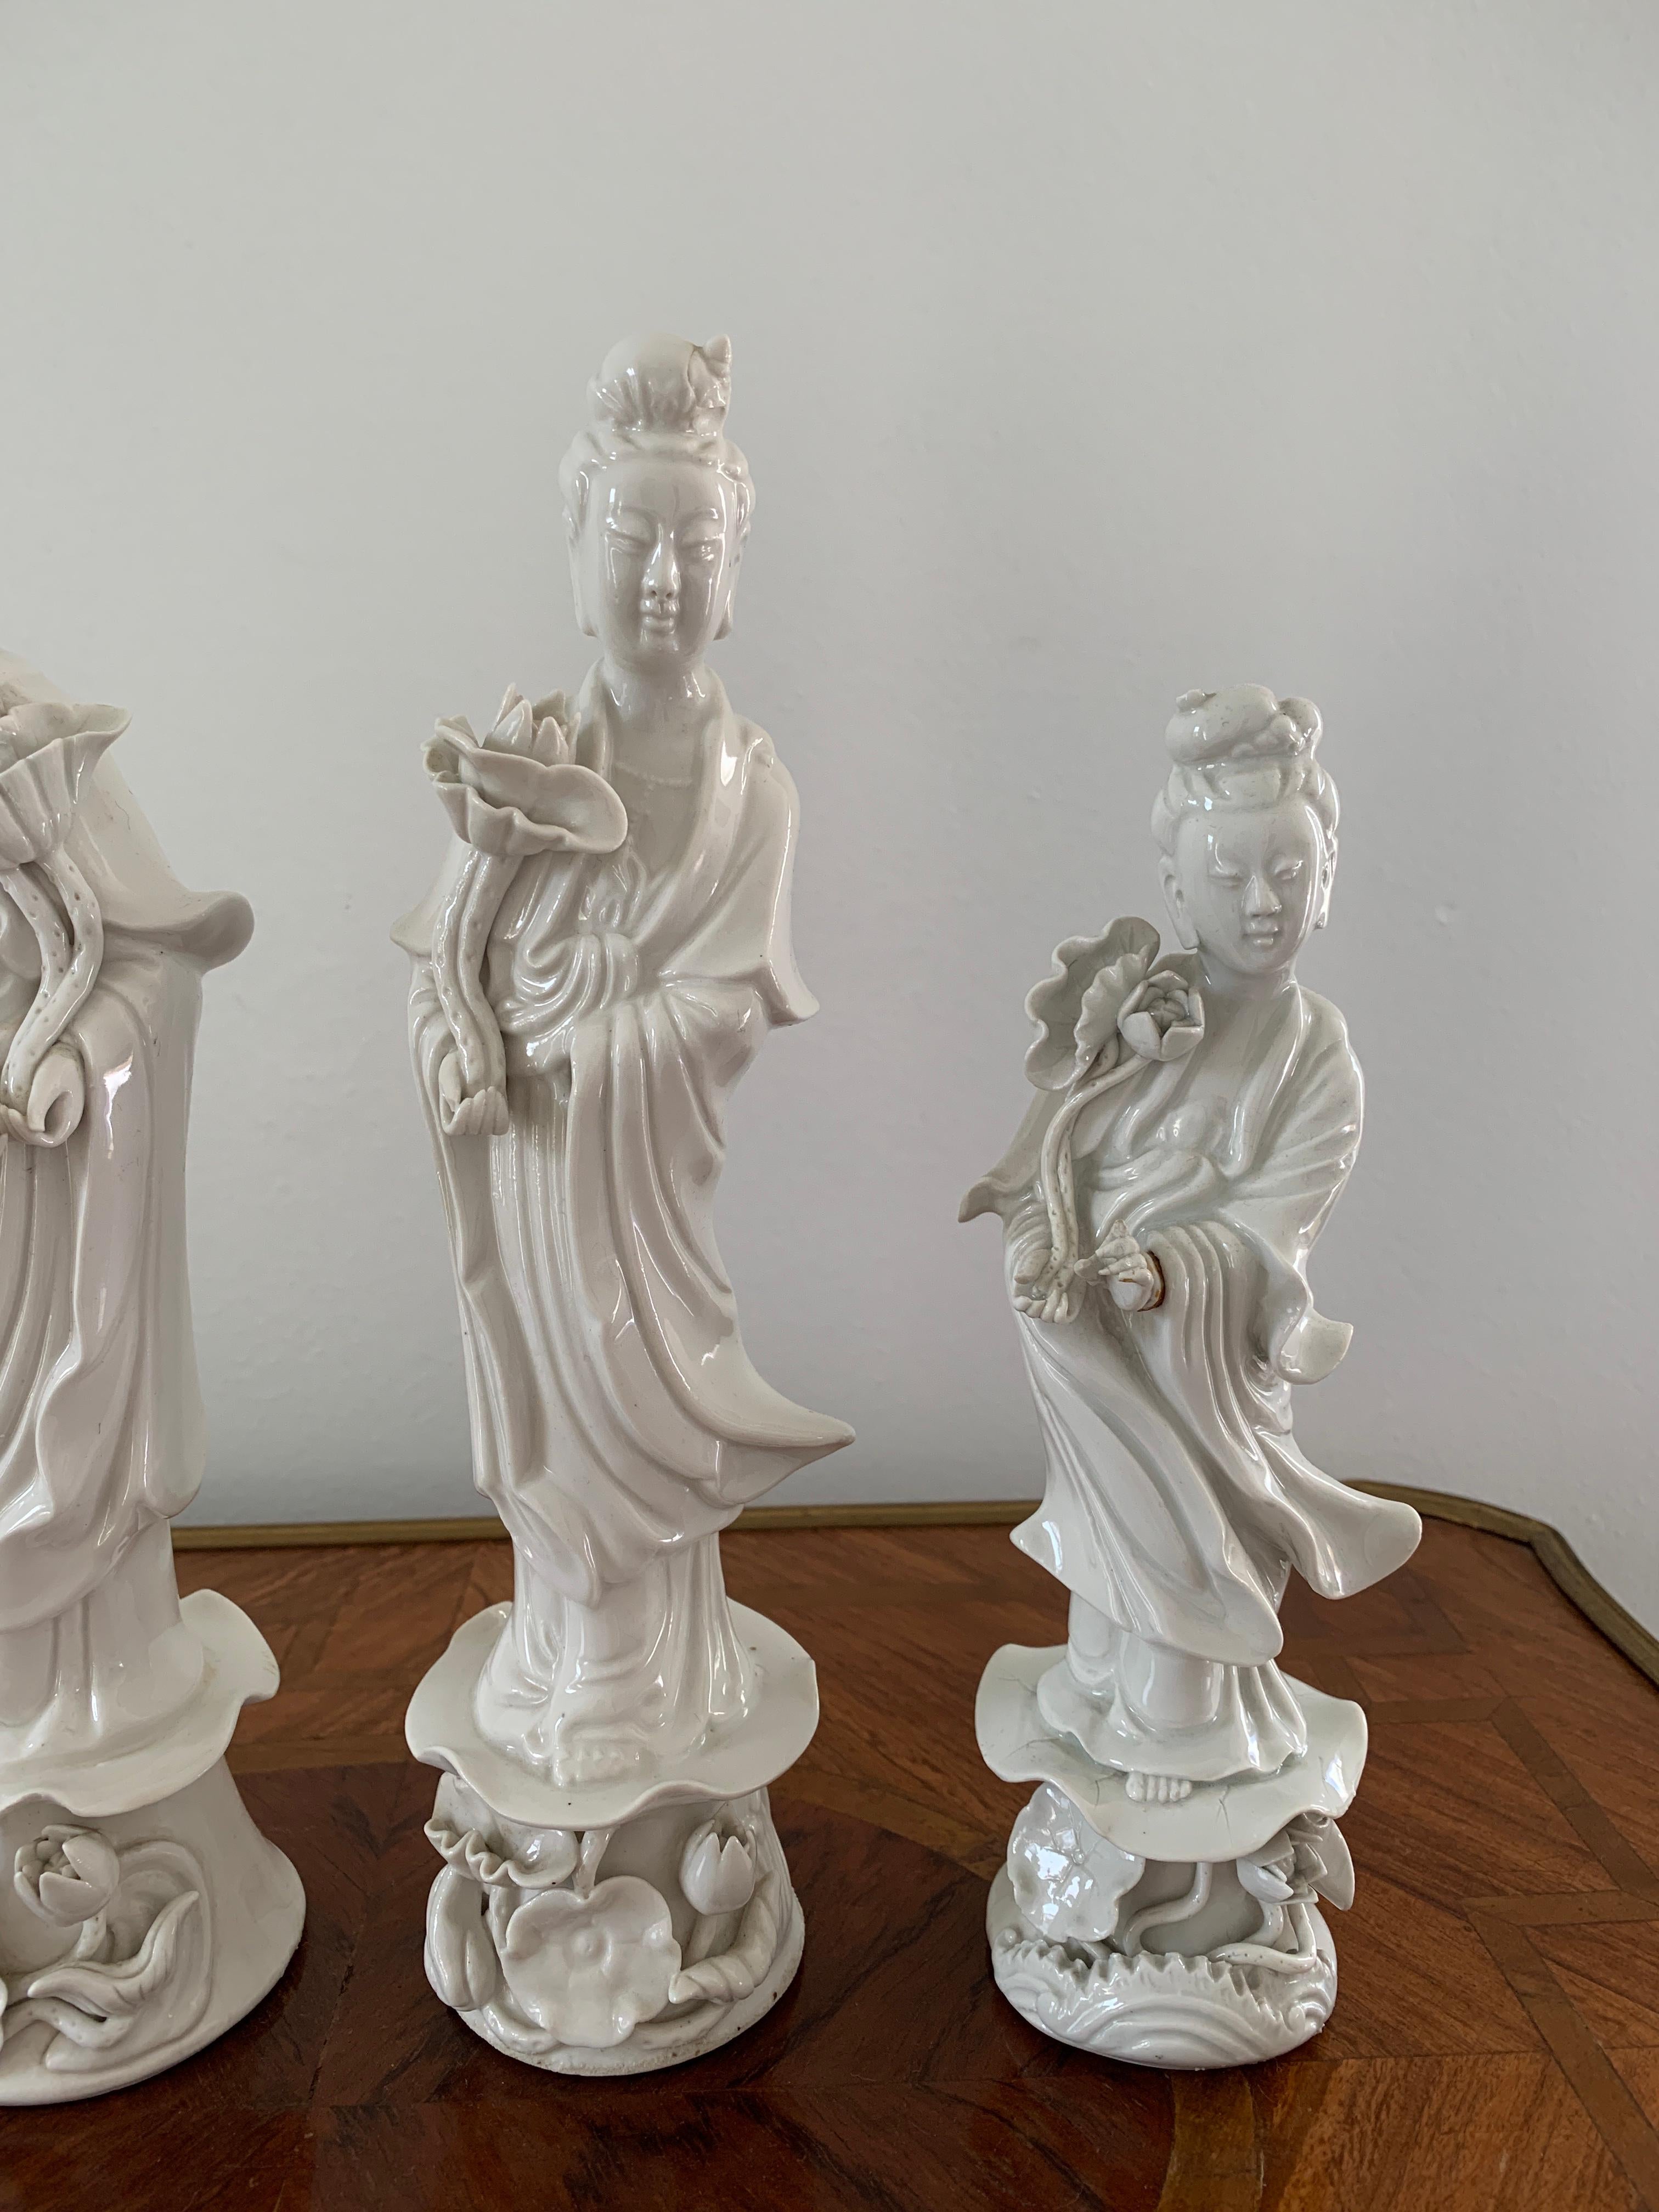 Chinese Mid 20th Century Vintage Blanc De Chine Figures - Set of 4 For Sale